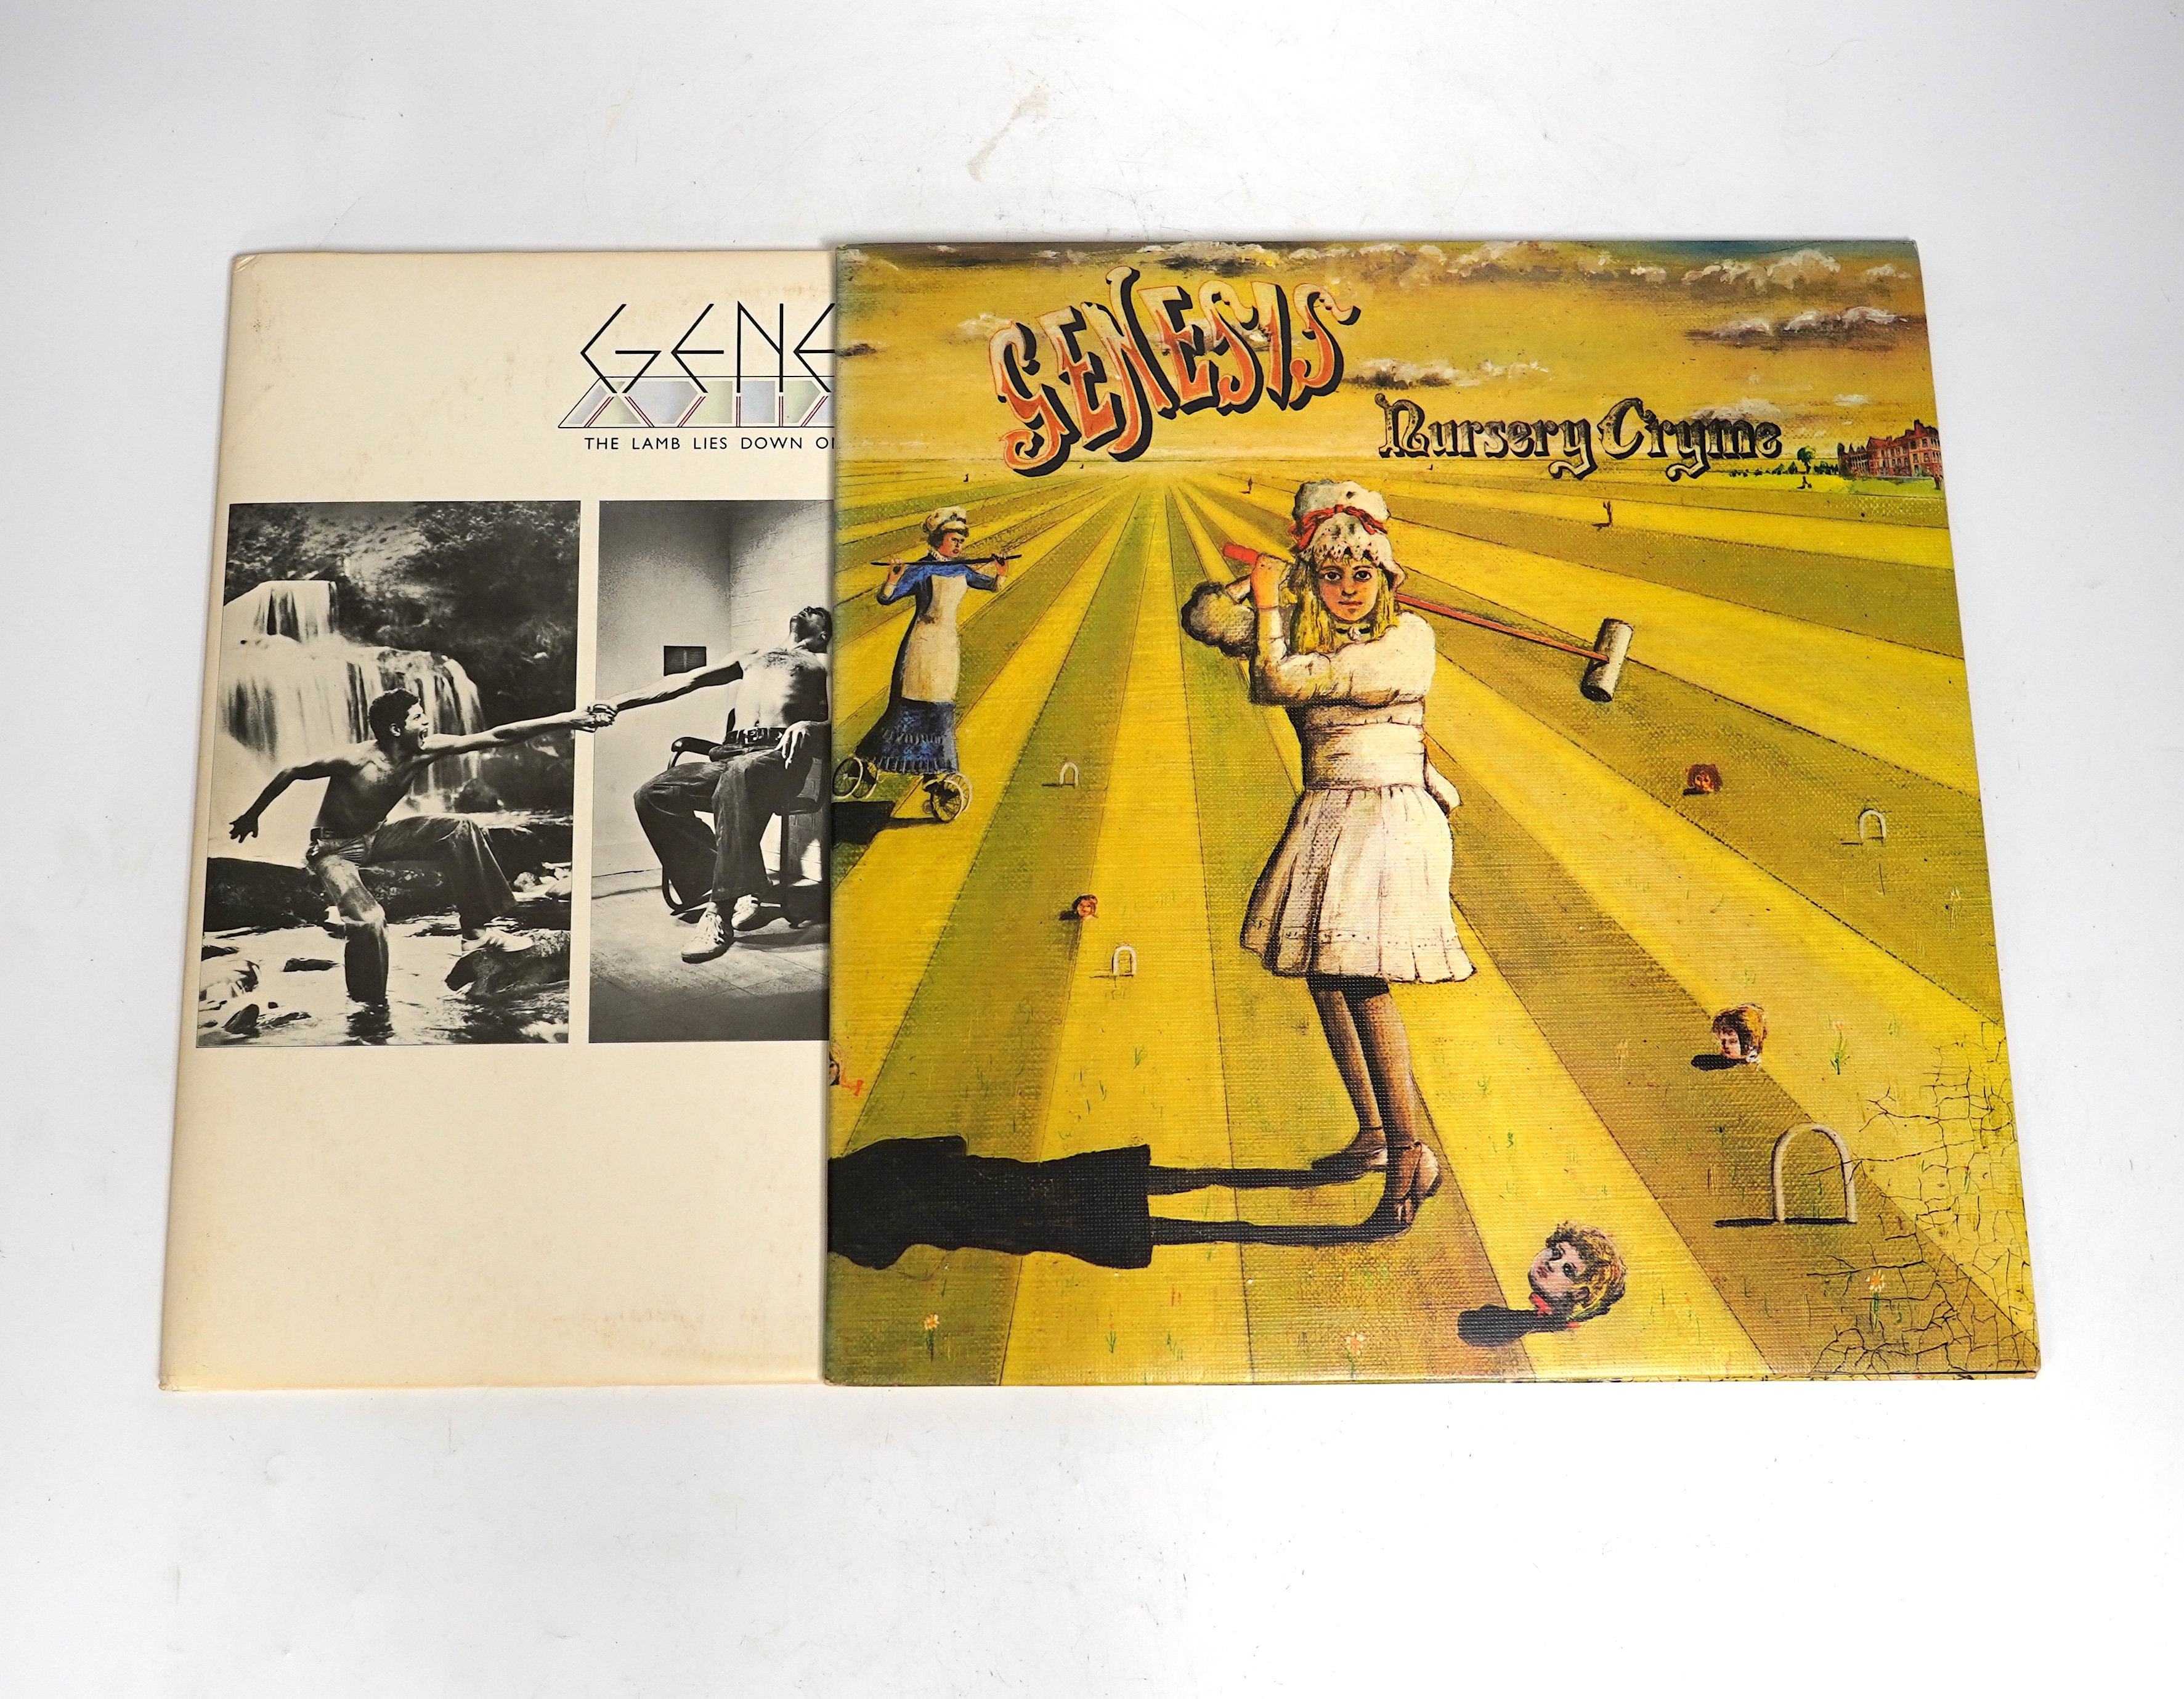 Two Genesis LP record albums; Nursery Cryme on pink Charisma label CAS.1052, with textured cover, and The Lamb Lies Down on Broadway on Charisma label CGS101, ‘Marketed by B&C Records’